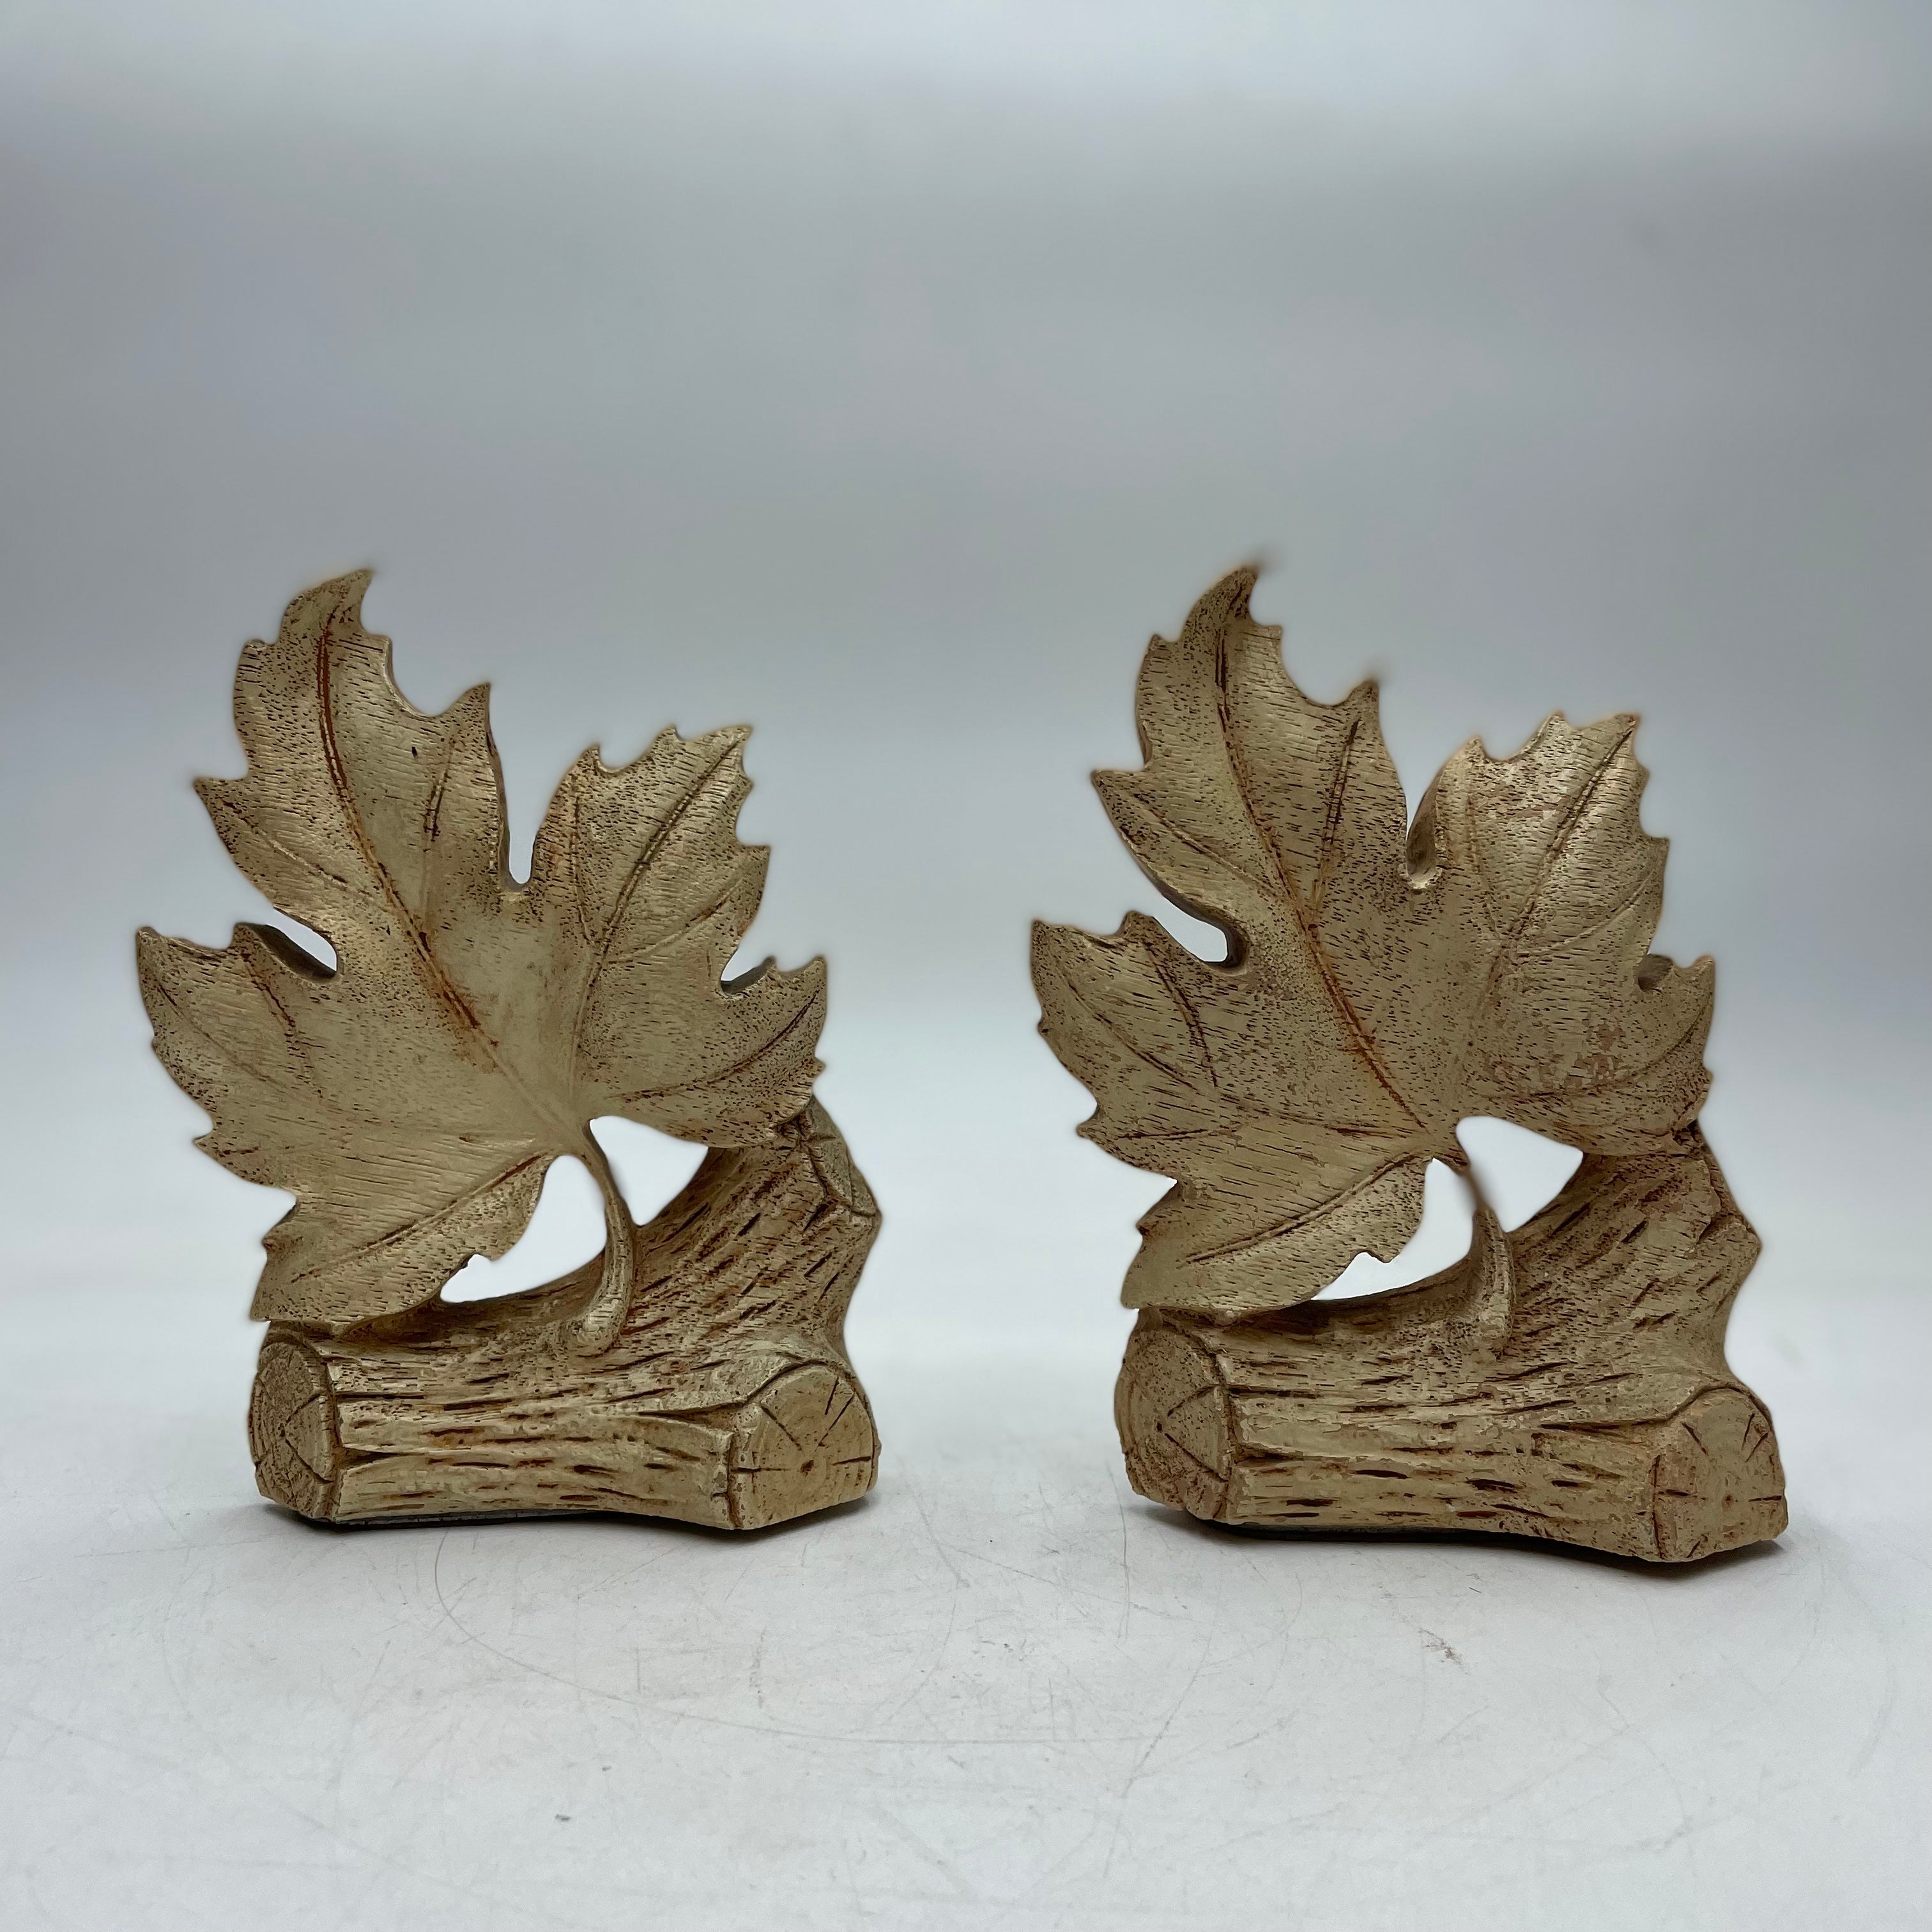 Pair of Durwood Maple Leaf Bookends